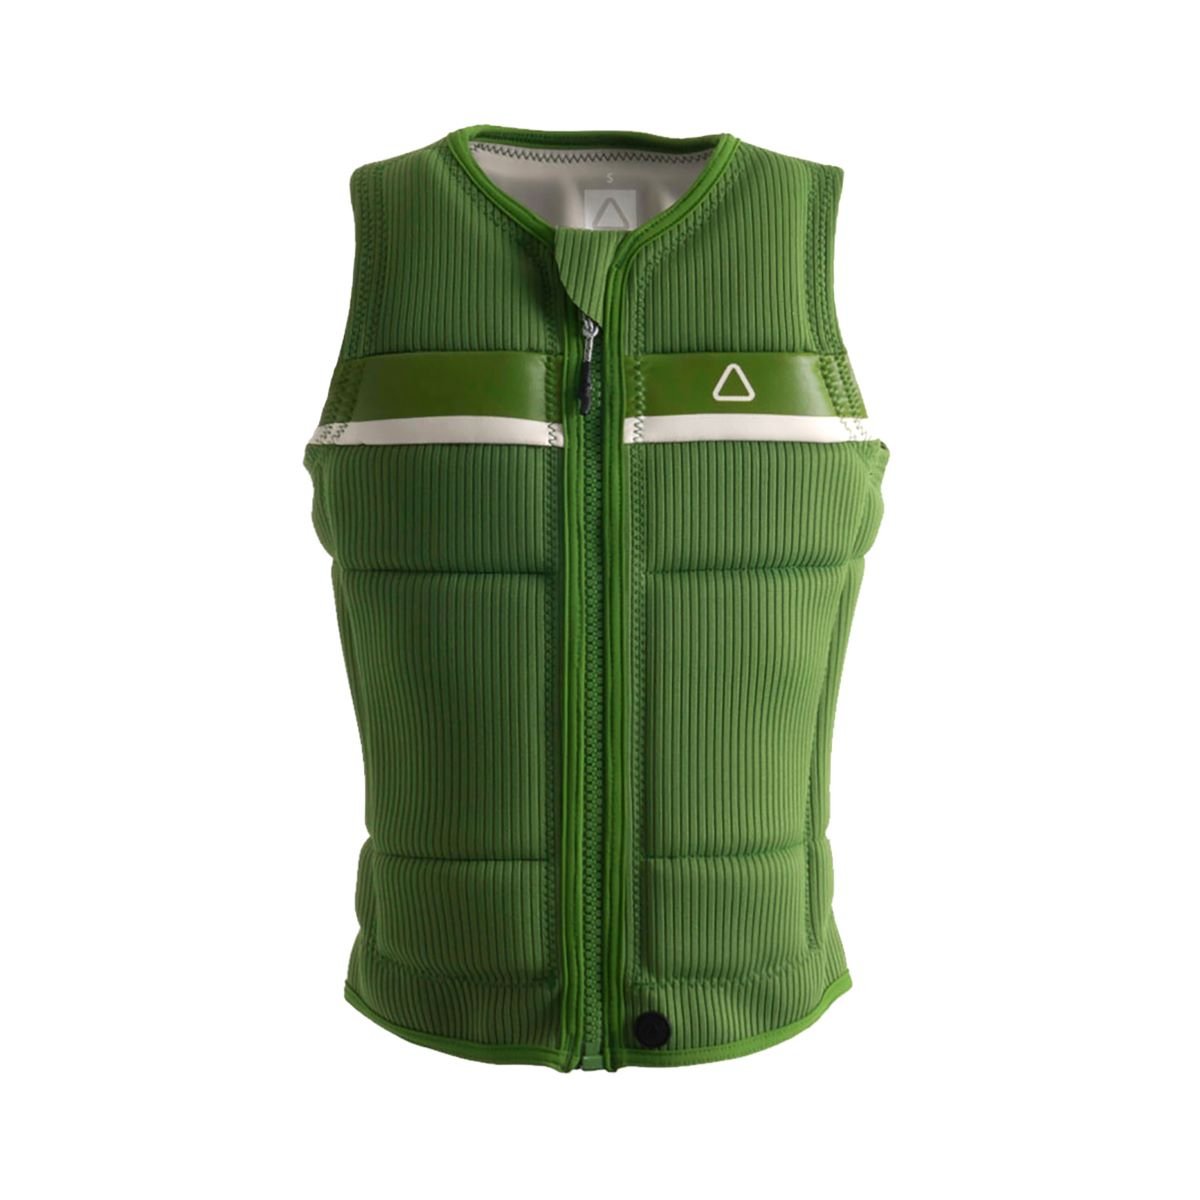 Follow Signal Ladies Comp Wake Vest in Olive